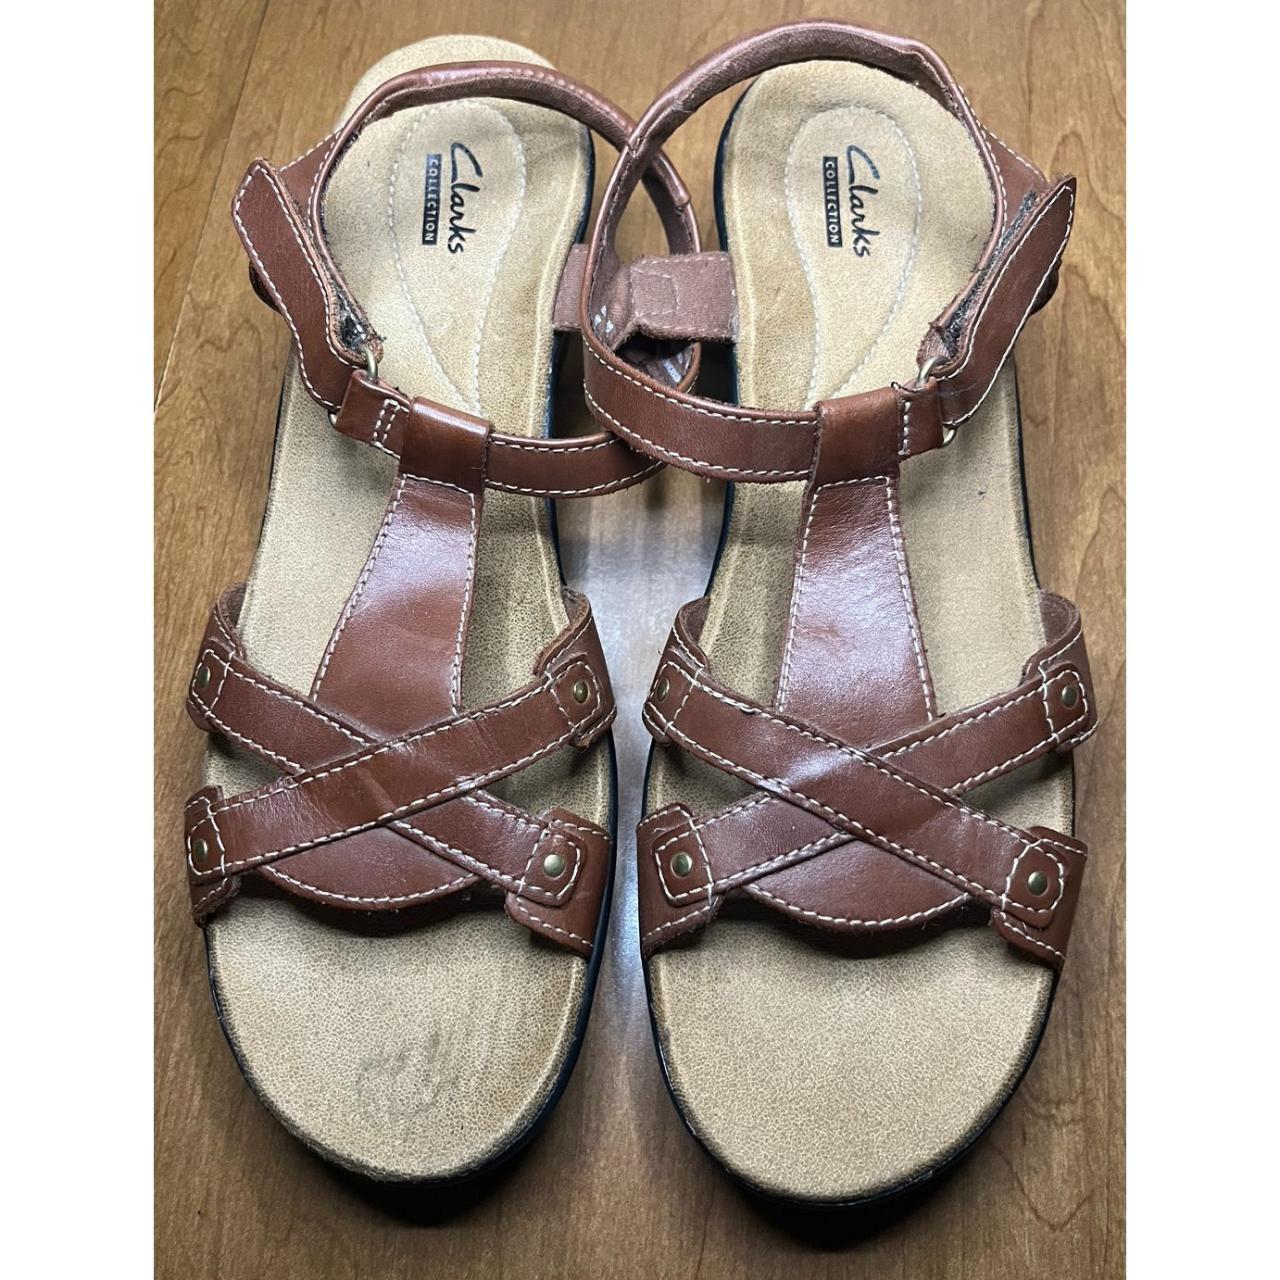 Clarks Collection Brown Leather Sandals Women's Size... - Depop